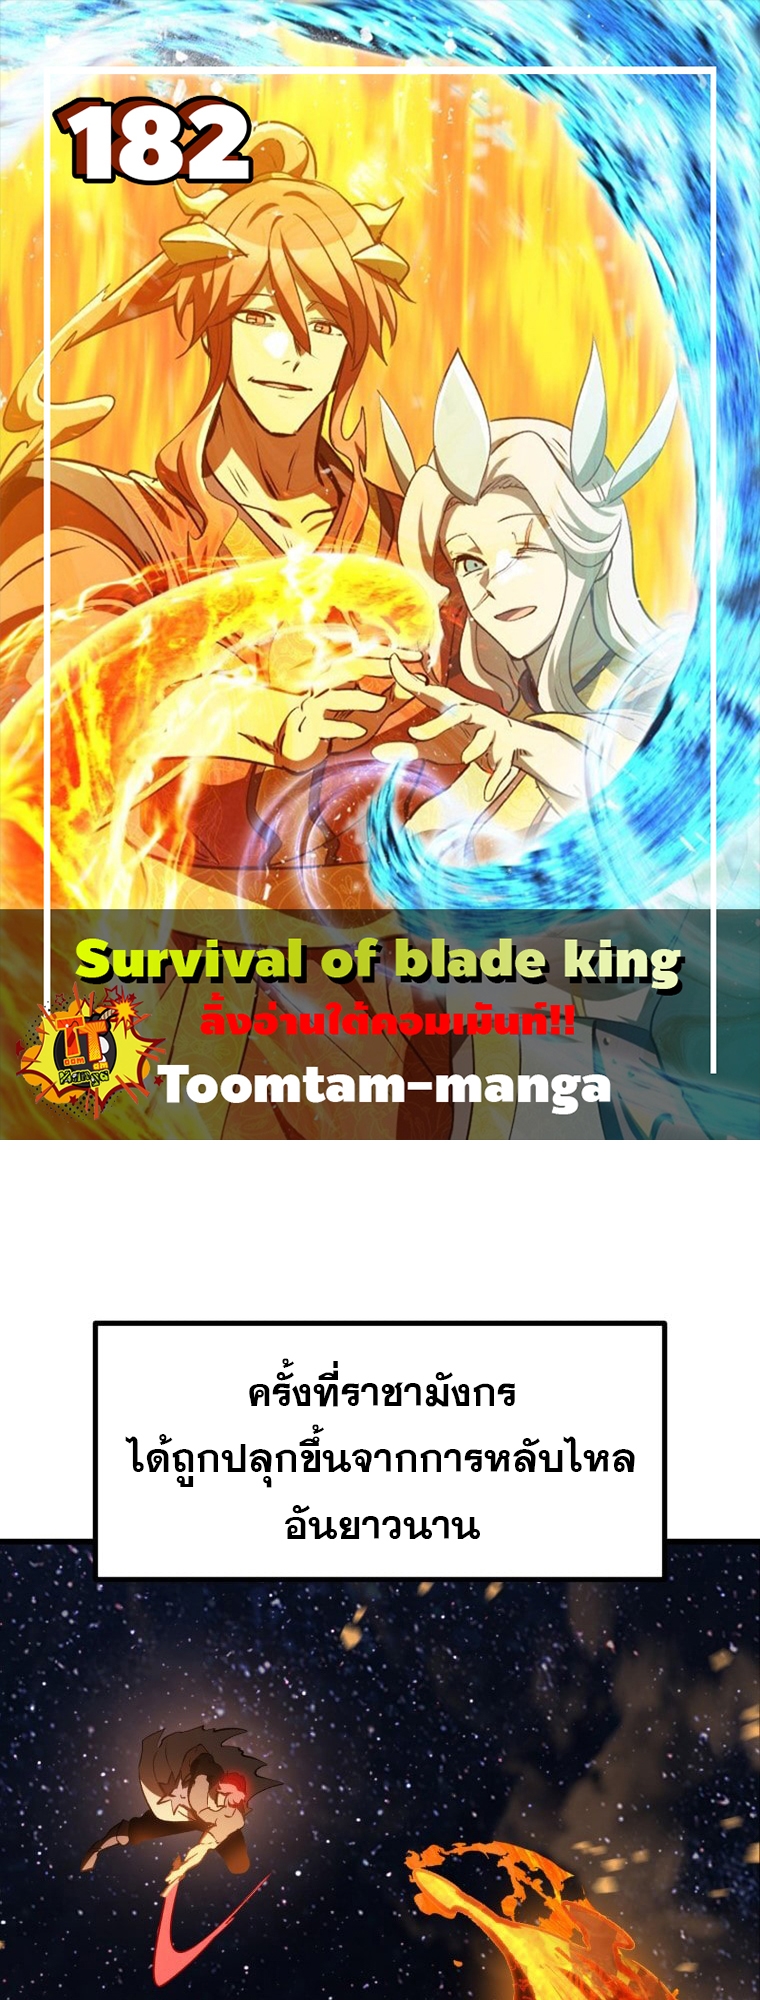 Survival of blade king 182 31 08 660001